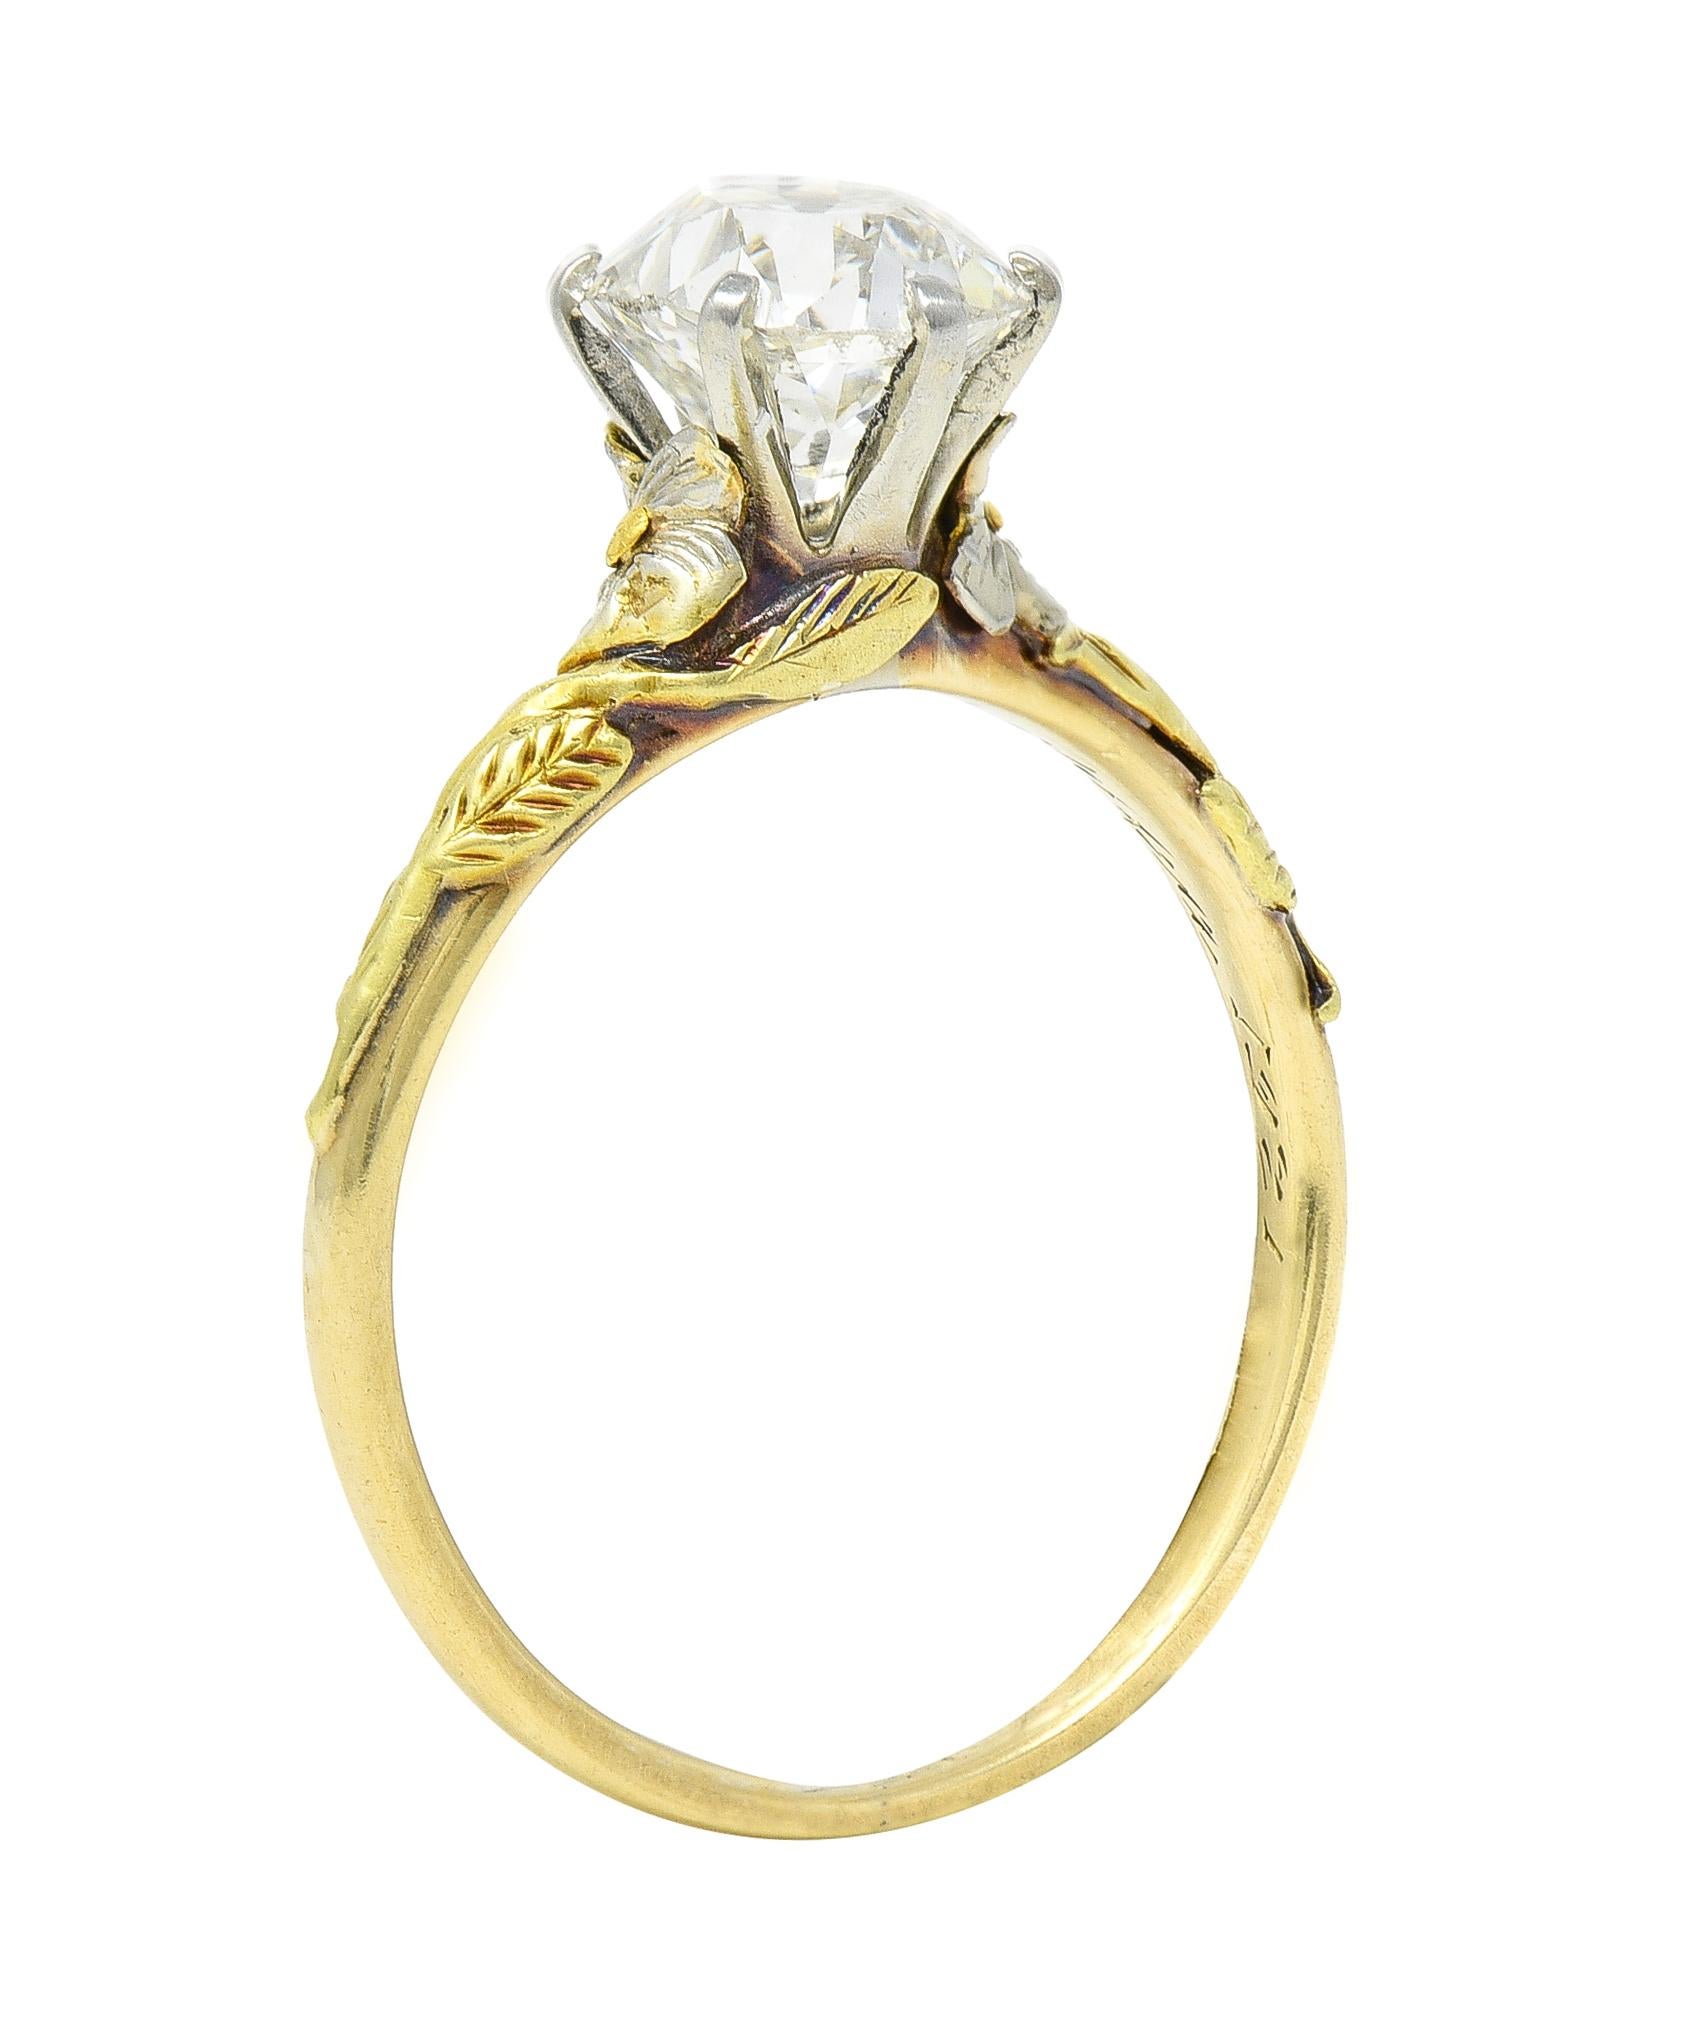 Centering an old mine cut diamond weighing approximately 1.28 carats - I color with SI1 clarity
Set in a six-prong white gold mounting with a highly rendered floral surround
Featuring green gold stems with white gold flowers and yellow gold